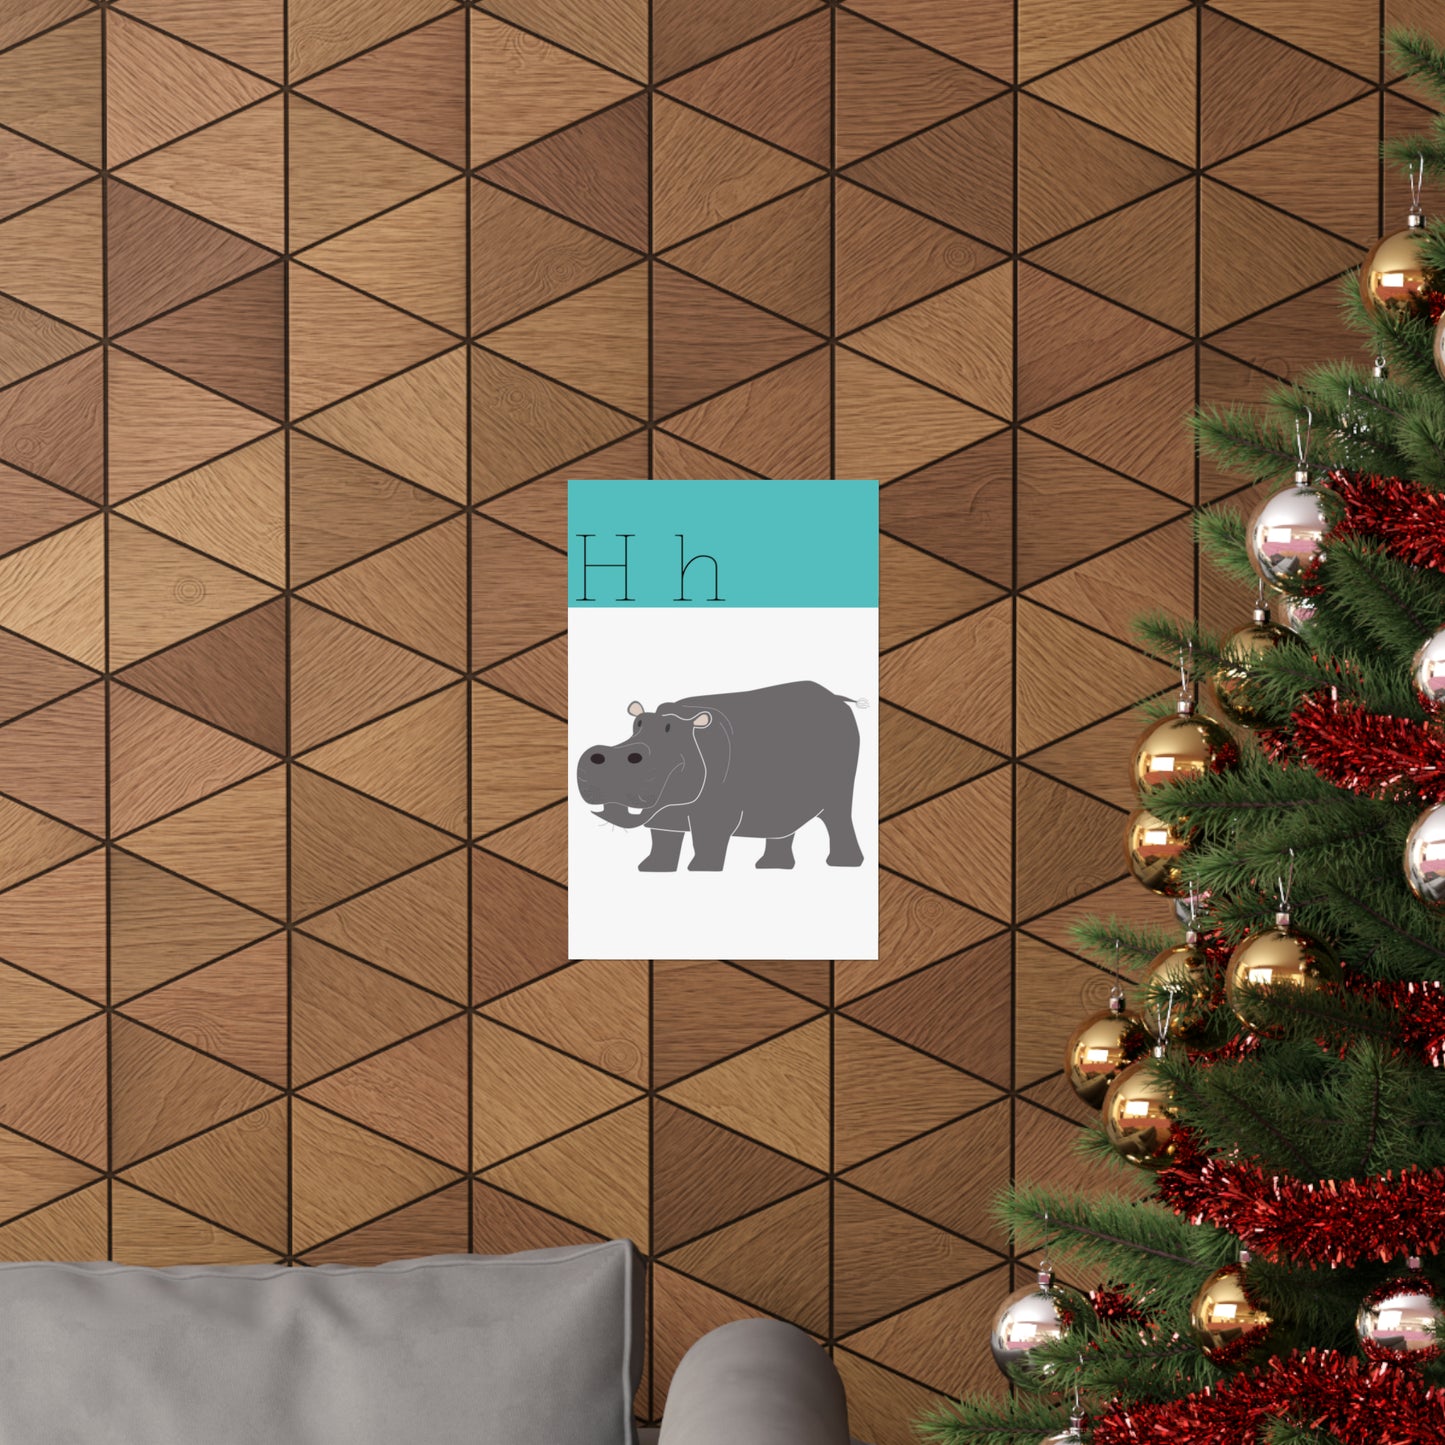 Hippo Poster on Wooden Wall Beside a Christmas Tree